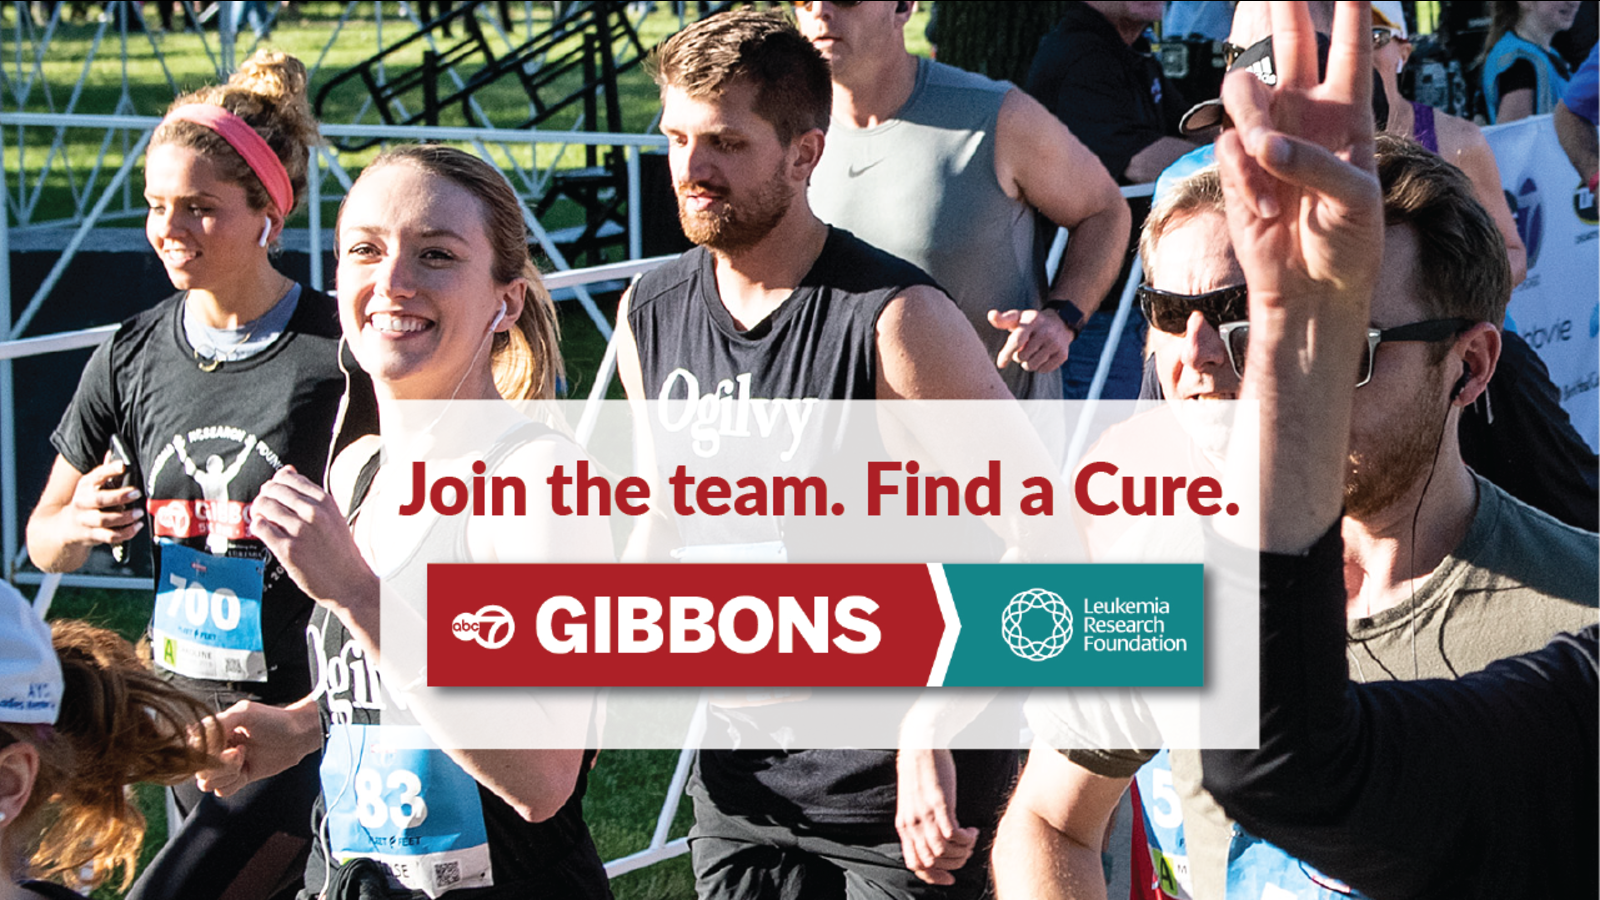 30th Annual ABC7 Gibbons Run for Leukemia Research Foundation fundraiser [Video]